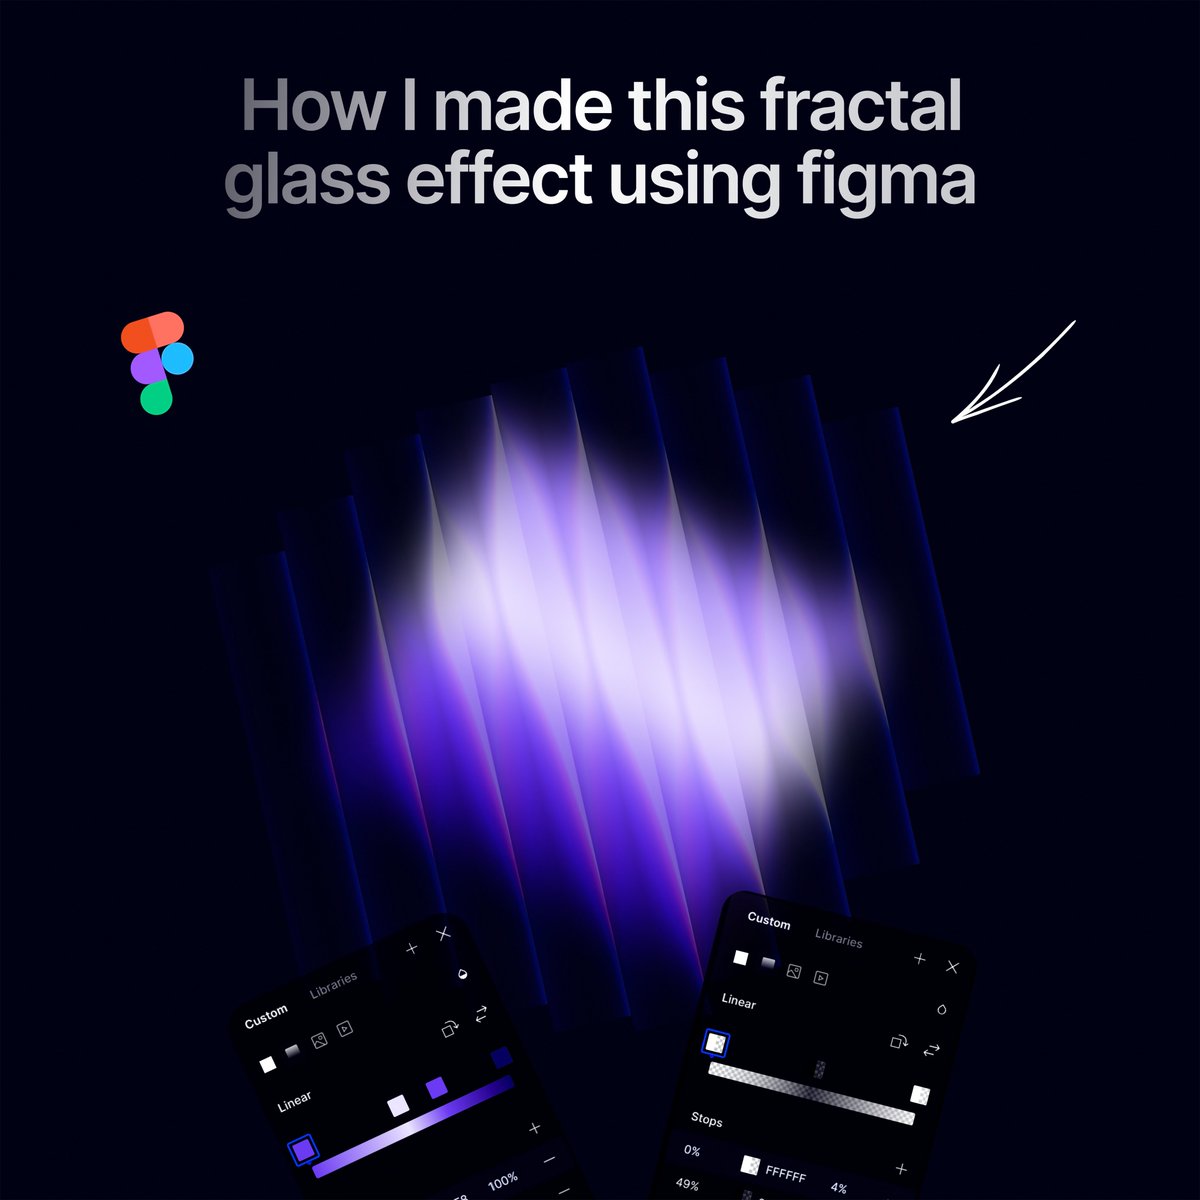 Here's how I created this effect using figma: